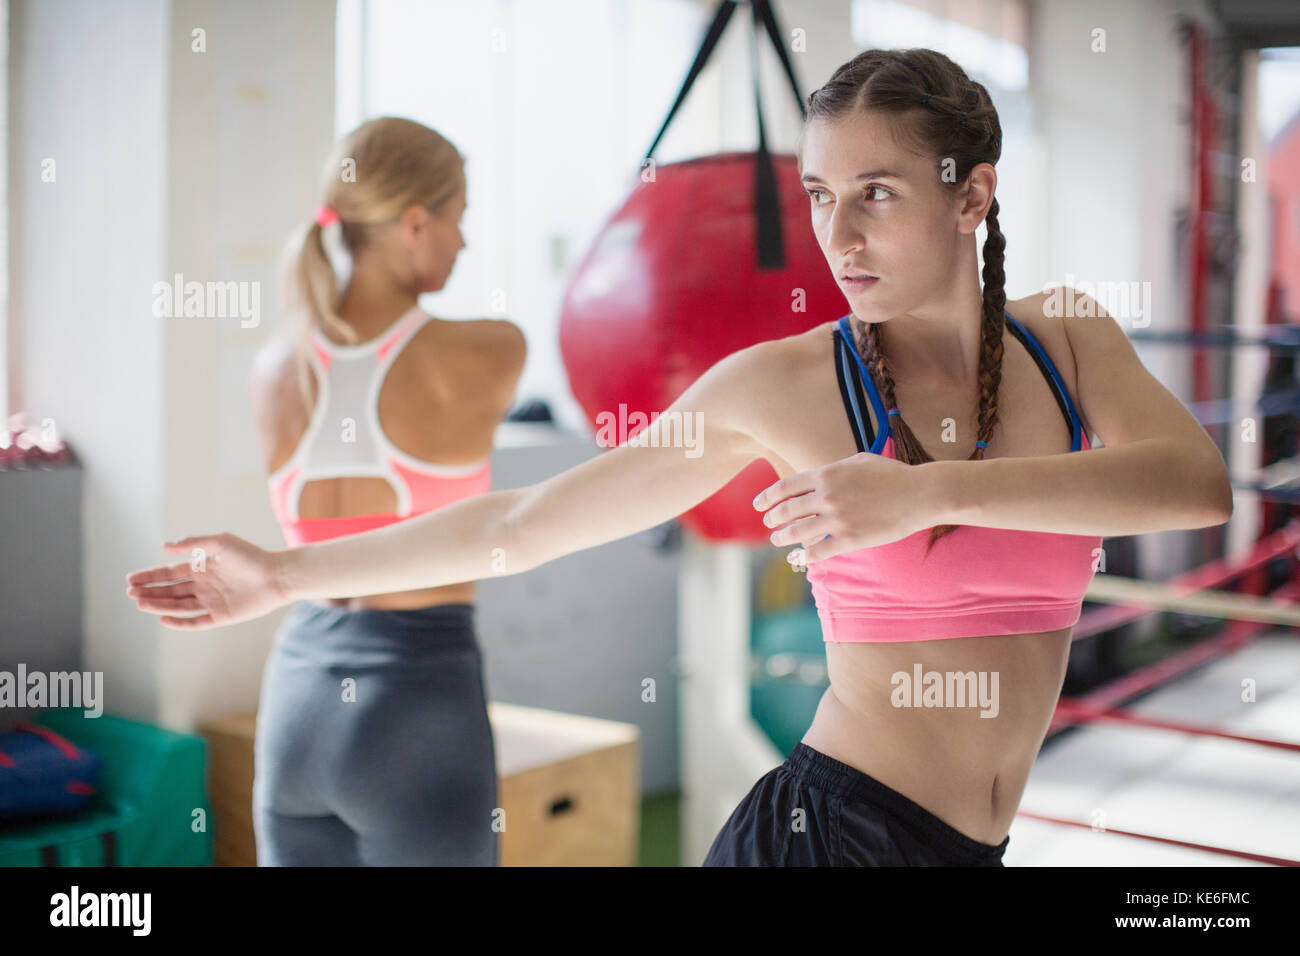 Focused young female boxer stretching, twisting in gym Stock Photo